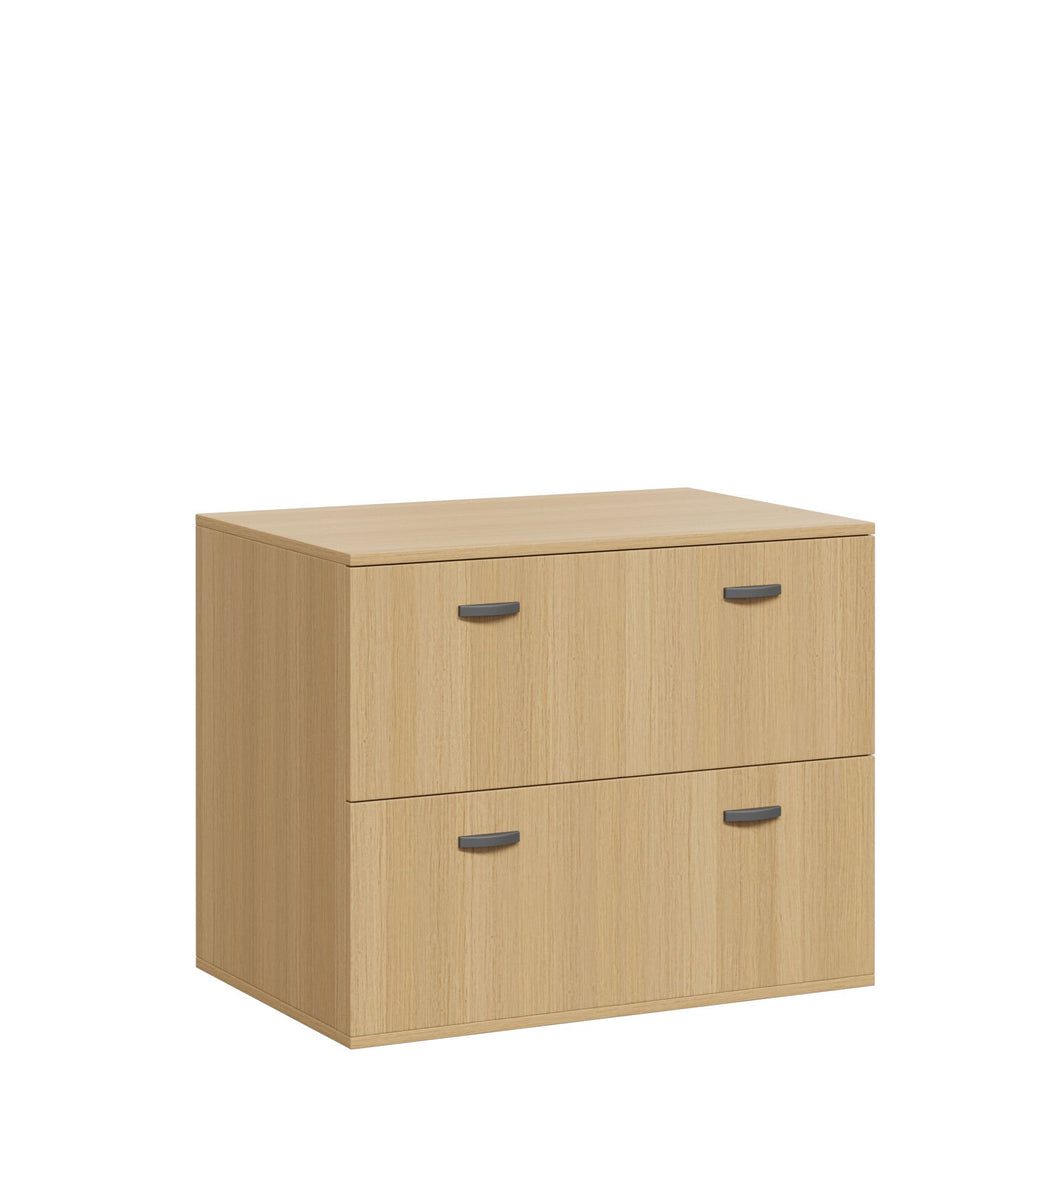 Double Lateral File drawer